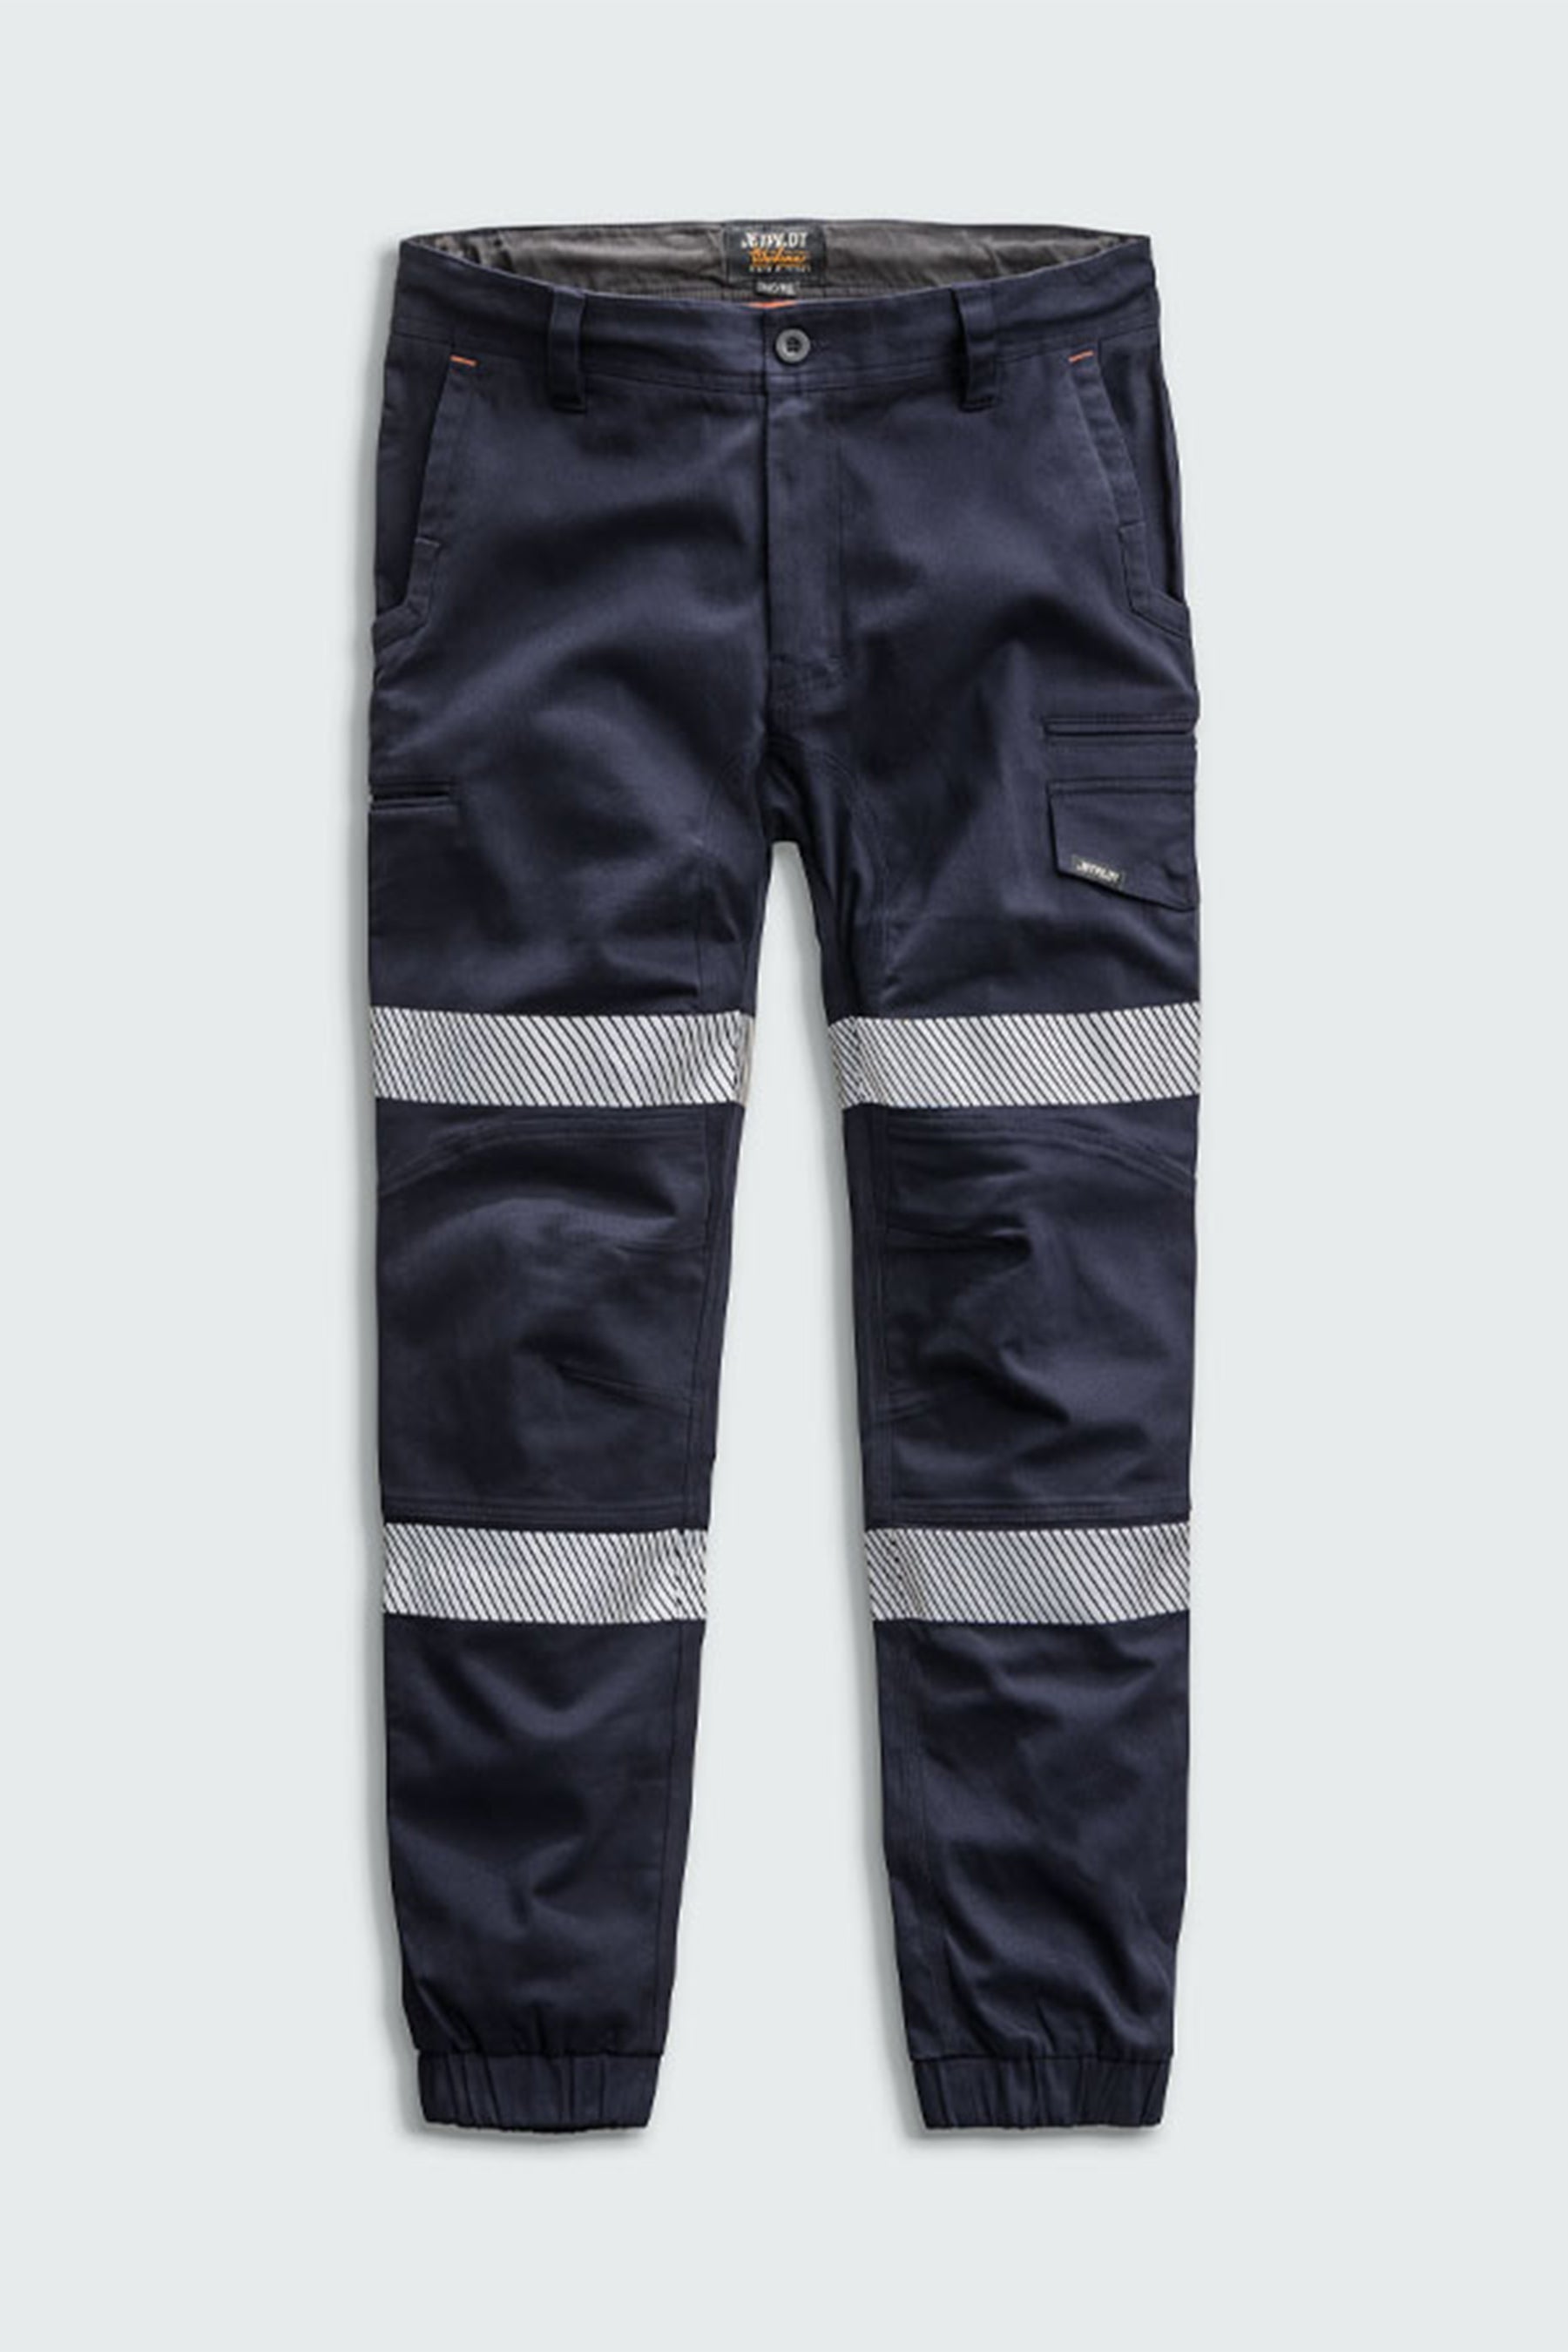 JP Taped Cuff Pant - Ink